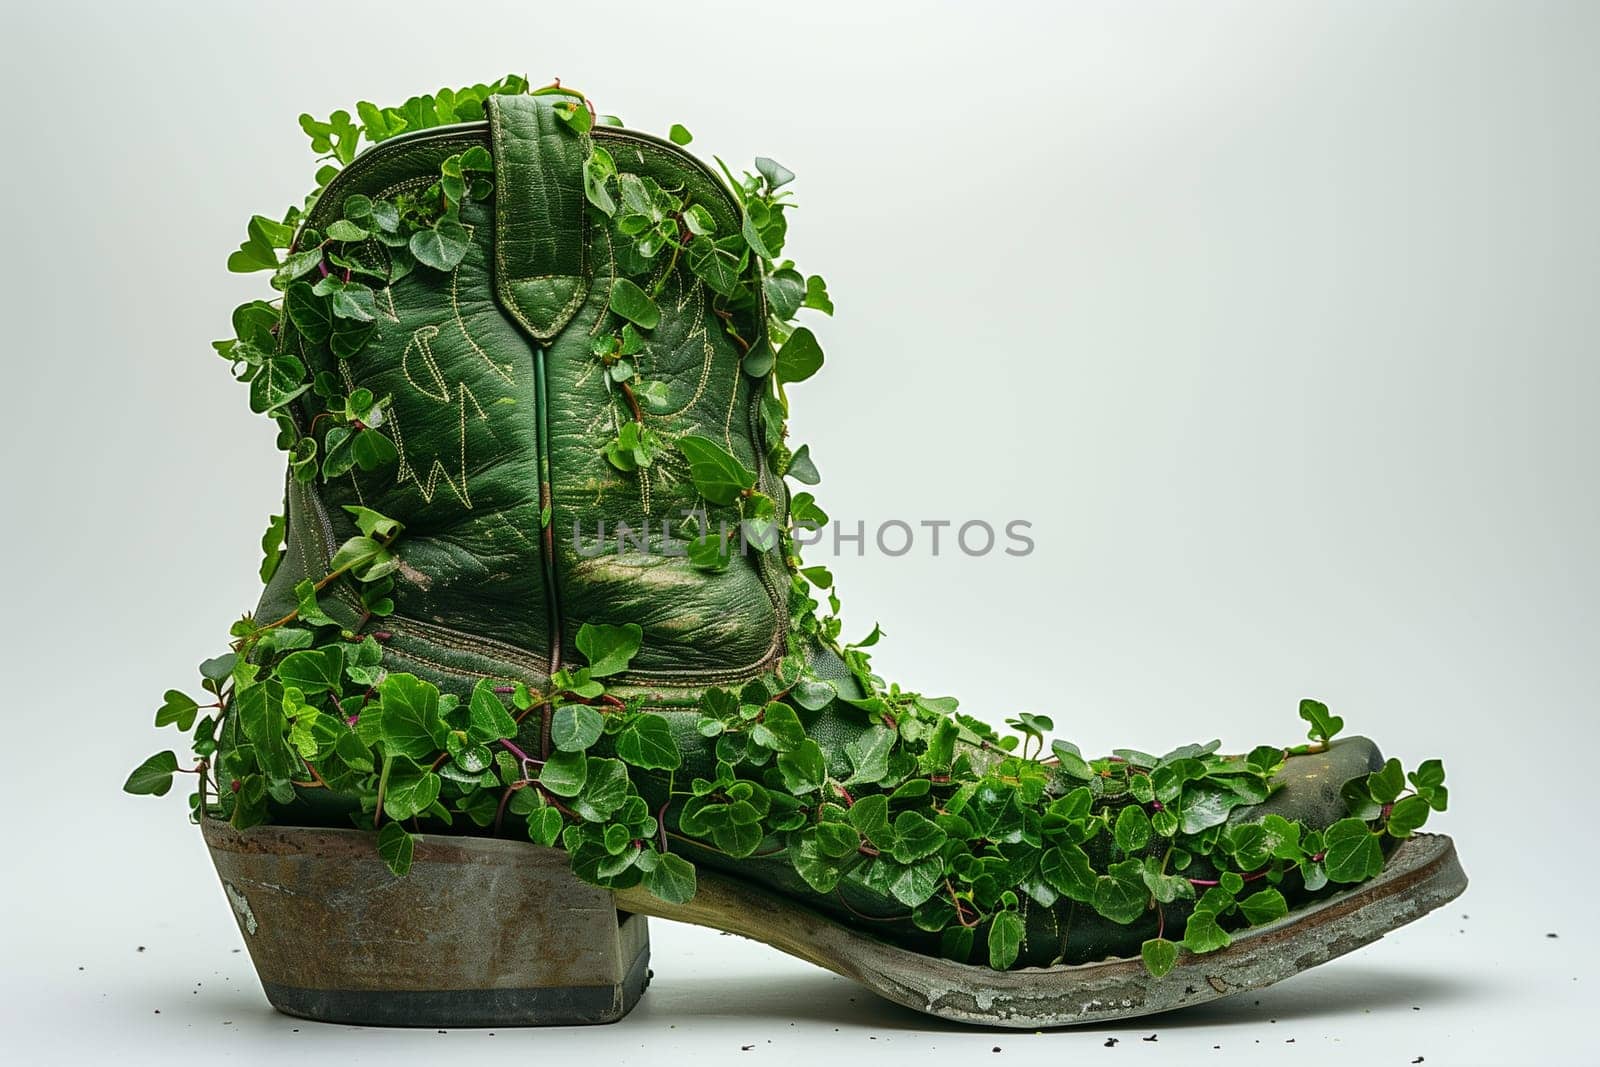 A pair of boots filled with soil have become a thriving garden, with various green plants sprouting from them.